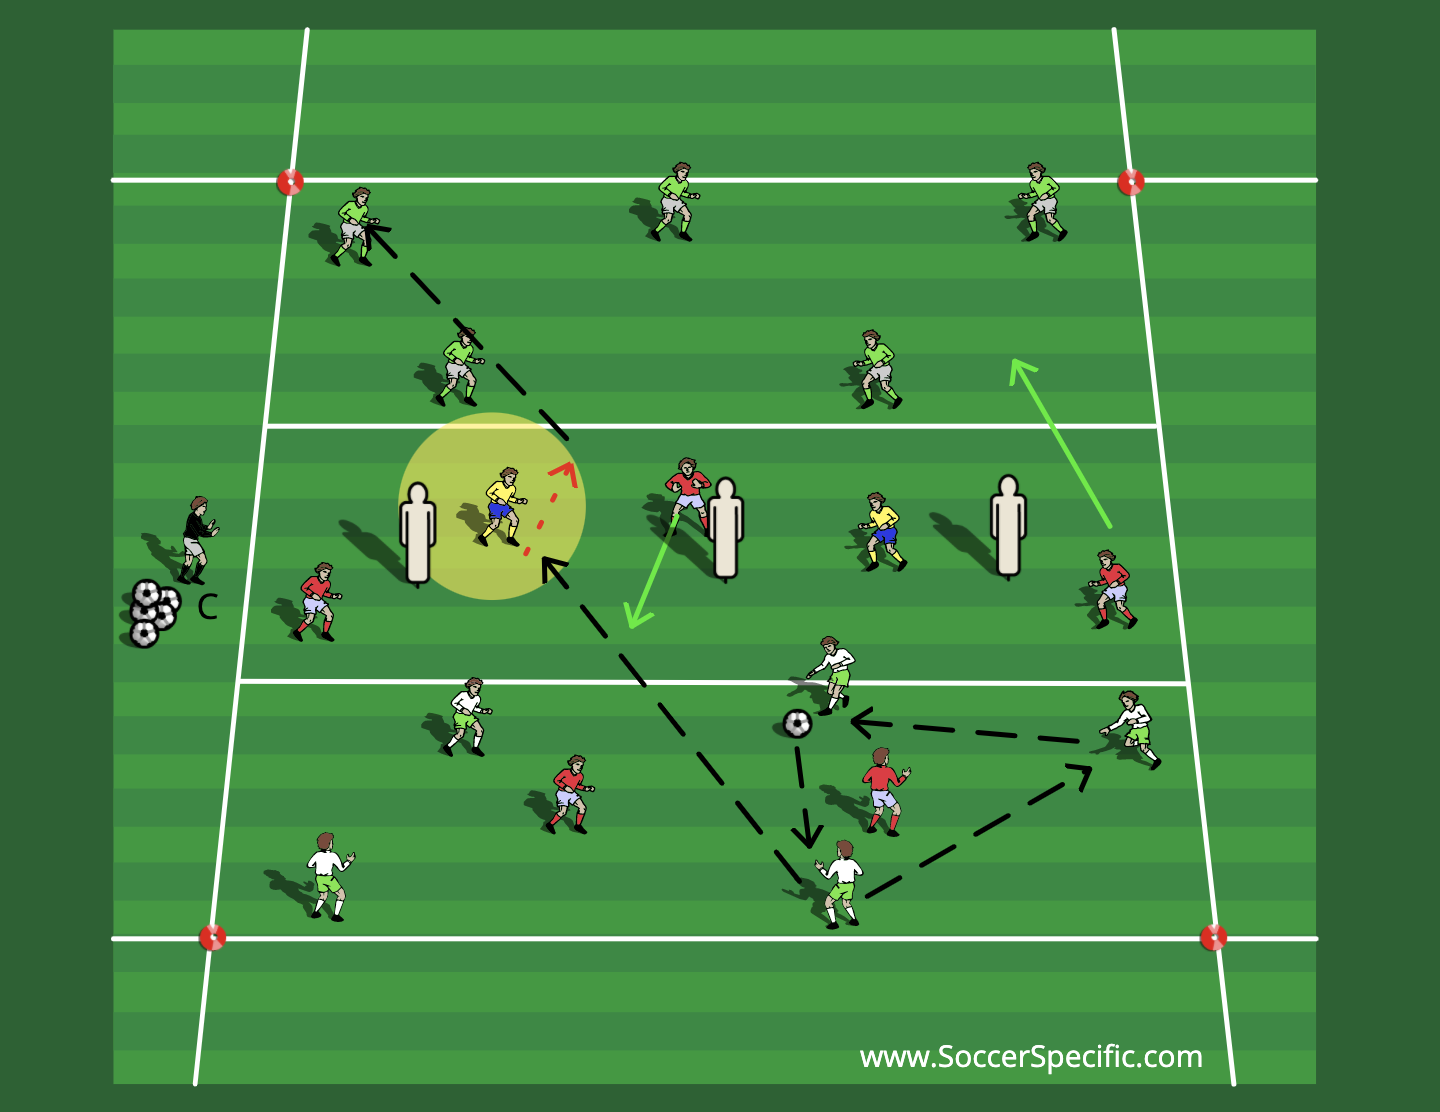 Switching Play 4 | SoccerSpecific.com